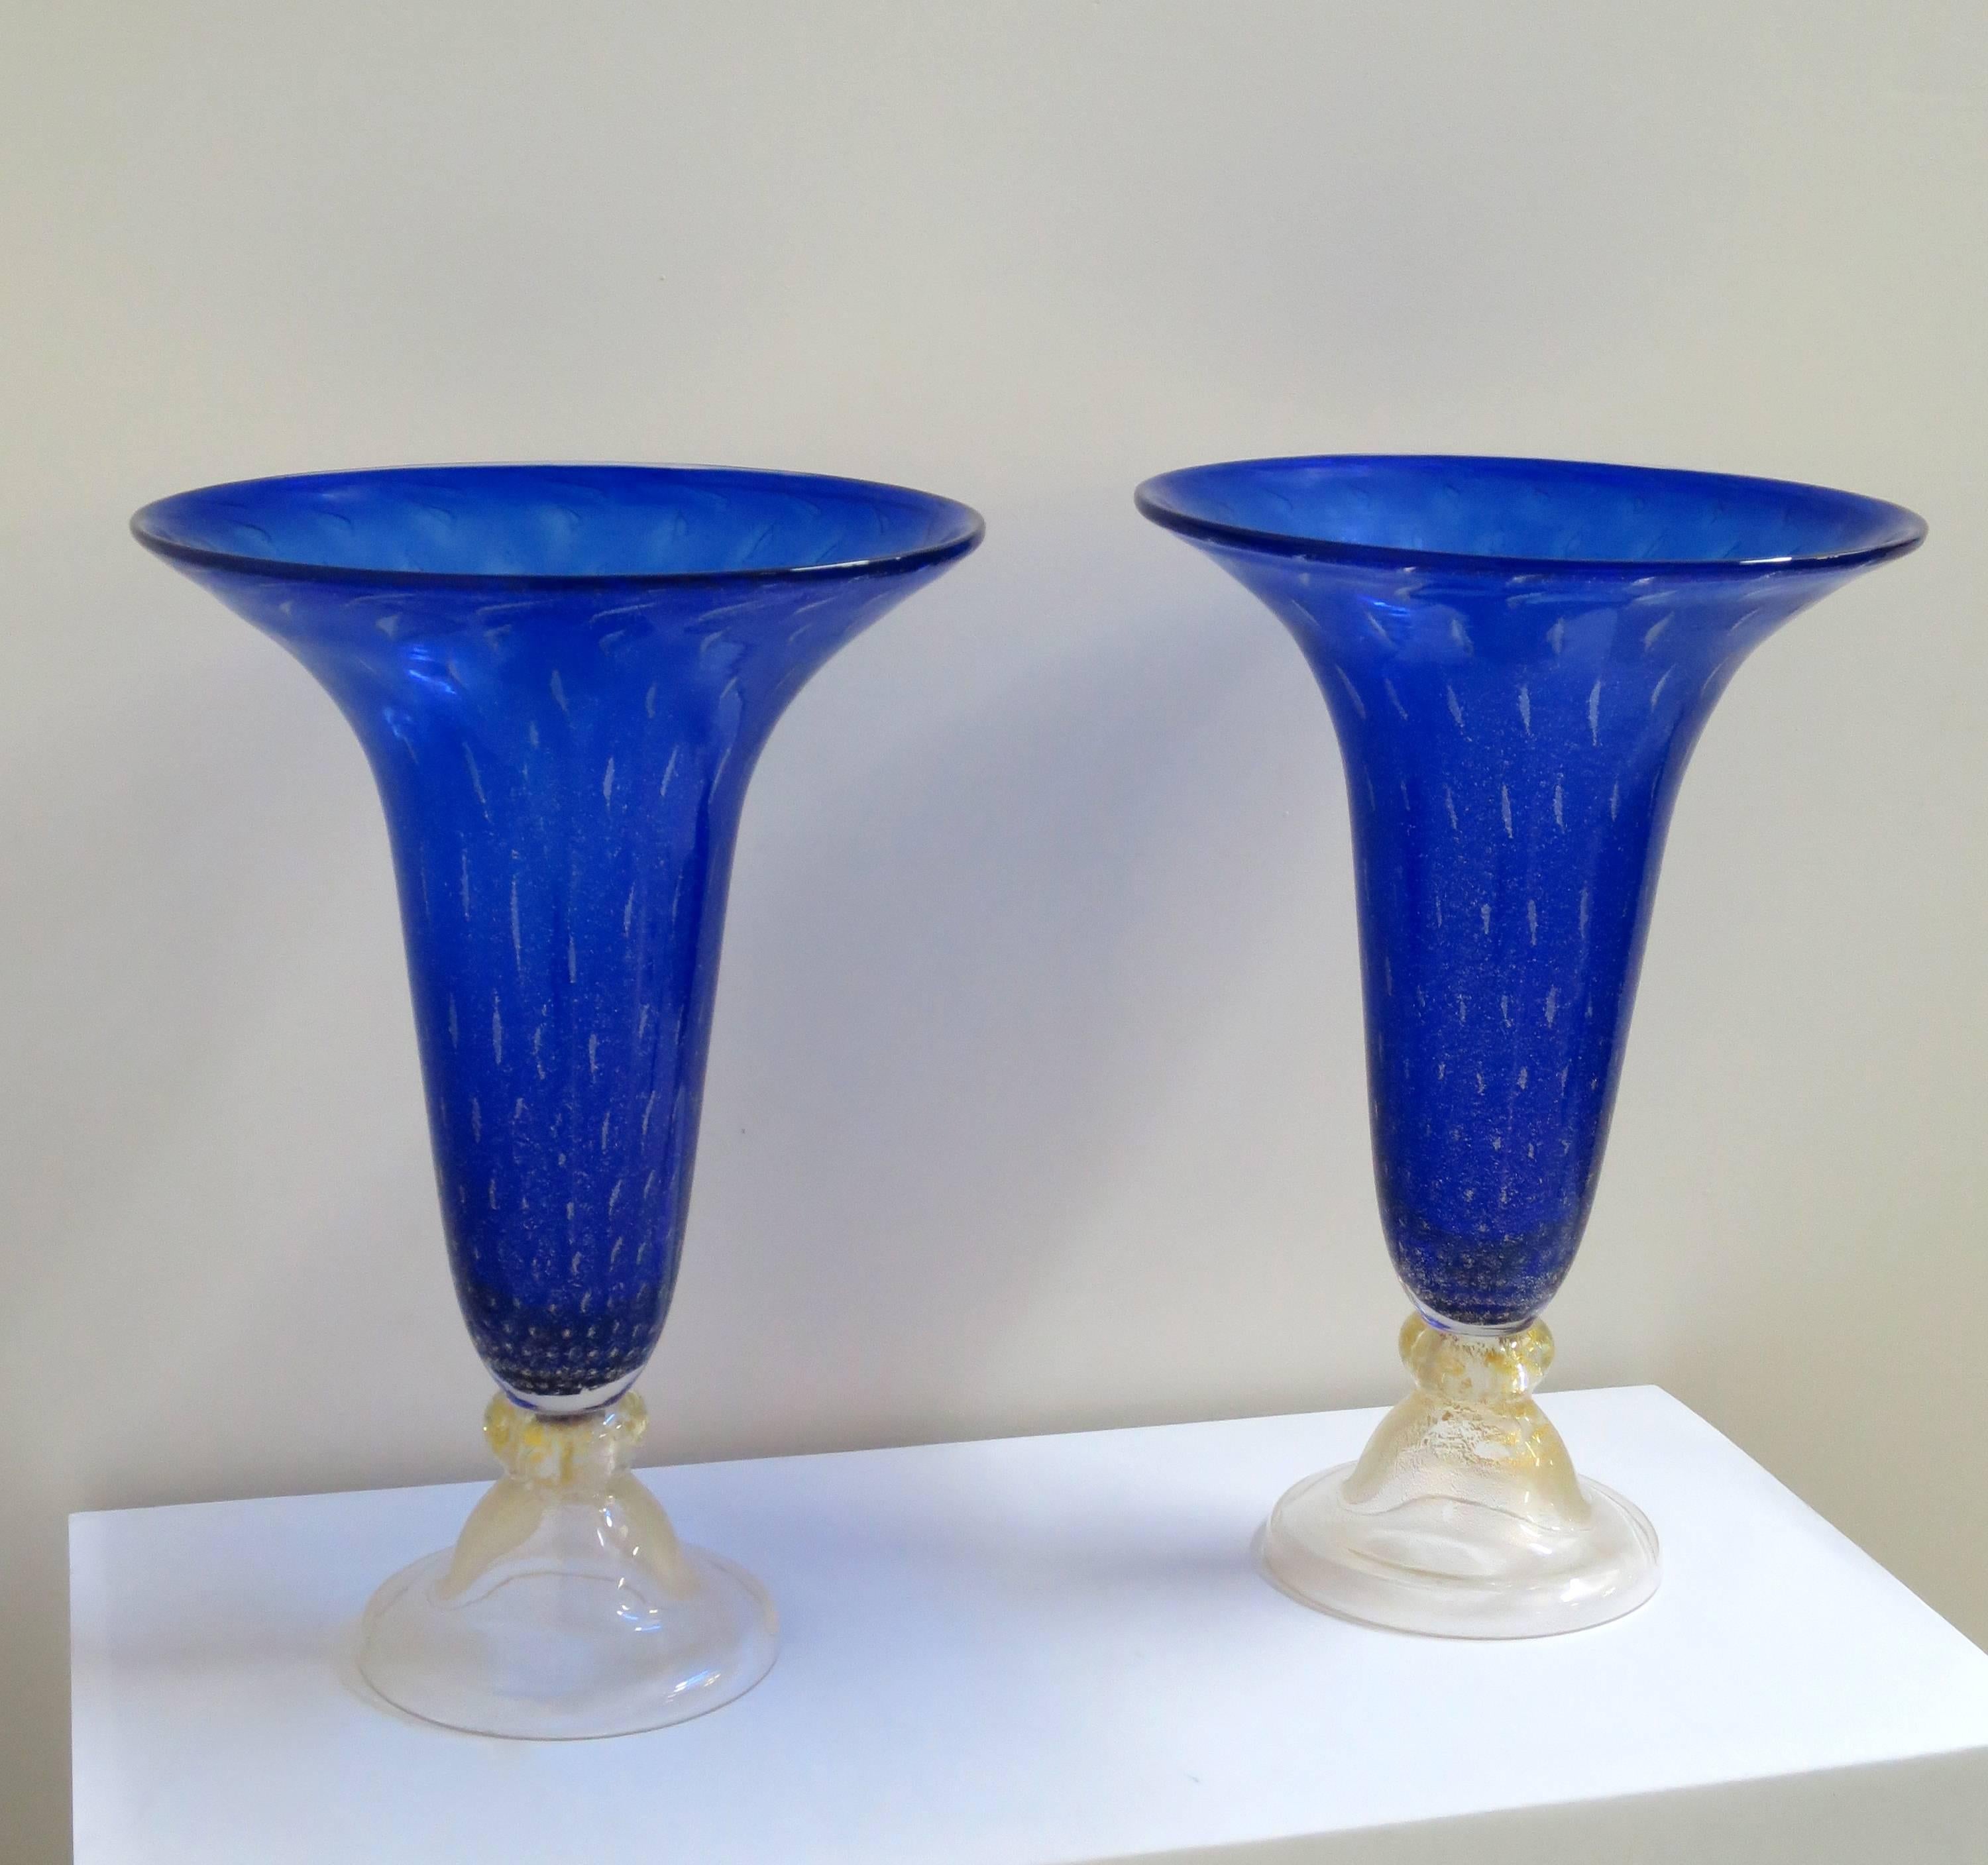 Exquisite pair of large royal blue Murano glass vases with controlled bubble and gold fleck. At 18 inches tall, these vases are tall enough to anchor a credenza or contemporary sofa table, a scale that is less common. Vibrant color is sure to bring